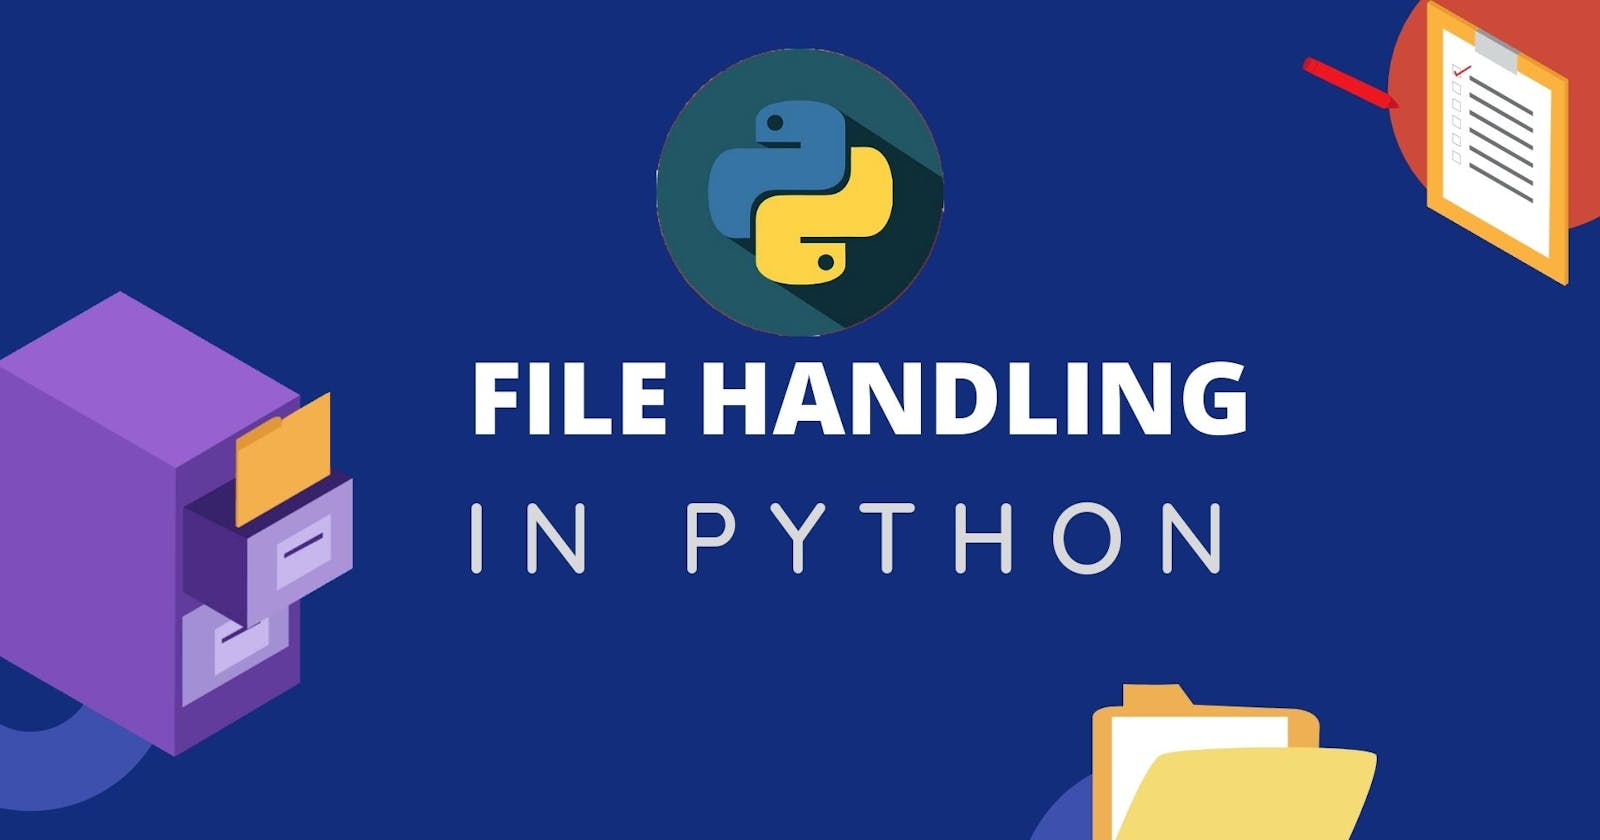 Python File Handling 101: A New Guide to Reading and Writing Files